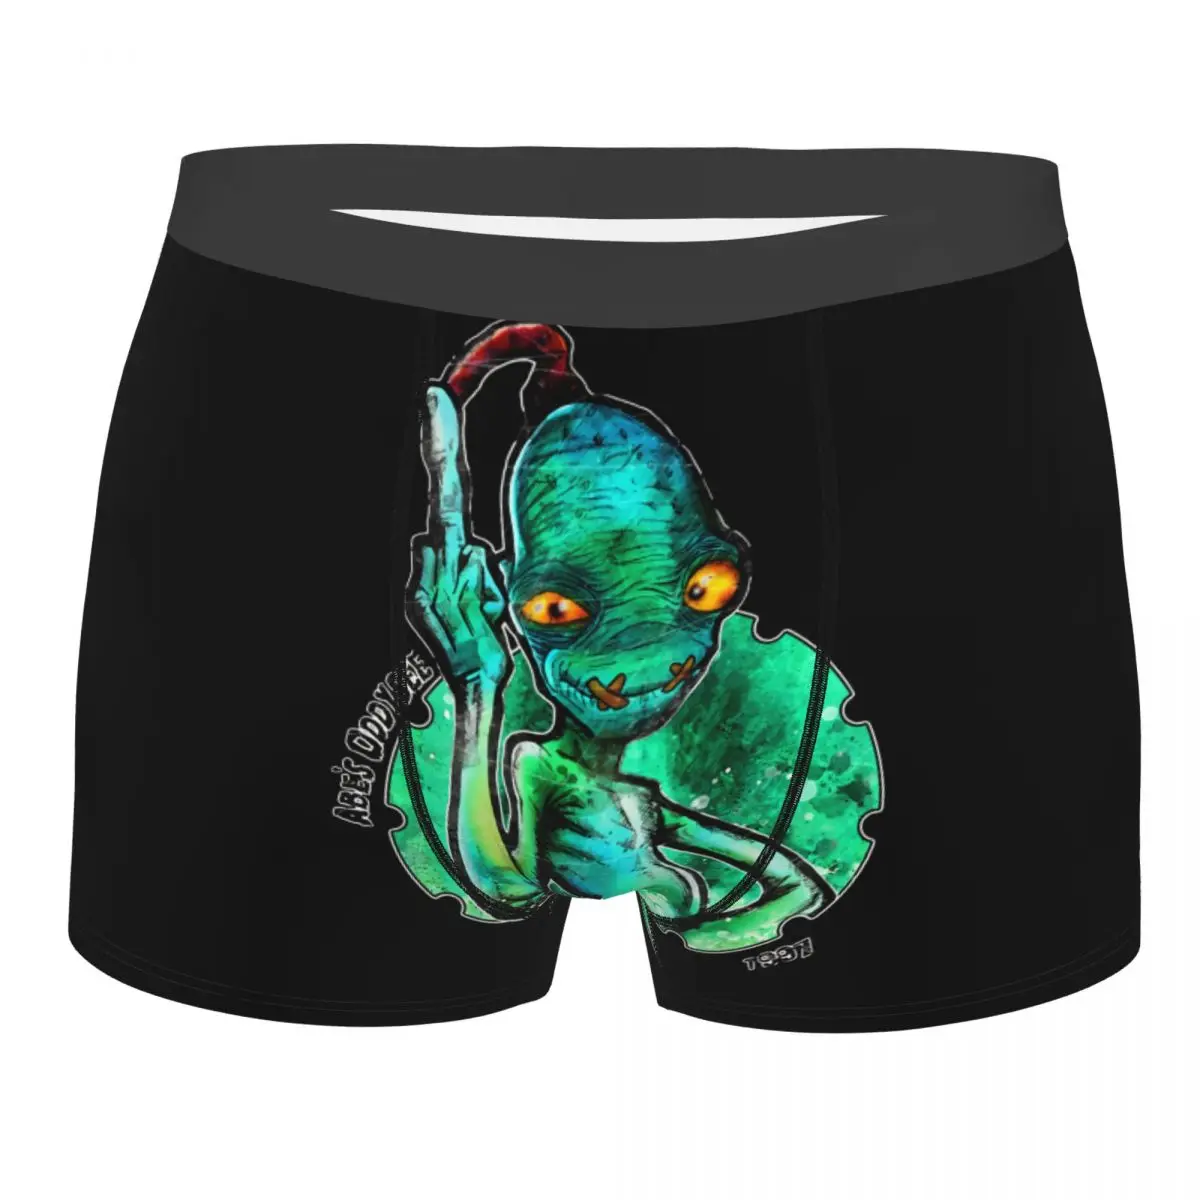 

Abe's Oddysee Man's Boxer Briefs Underpants OddWorld Game Highly Breathable High Quality Gift Idea